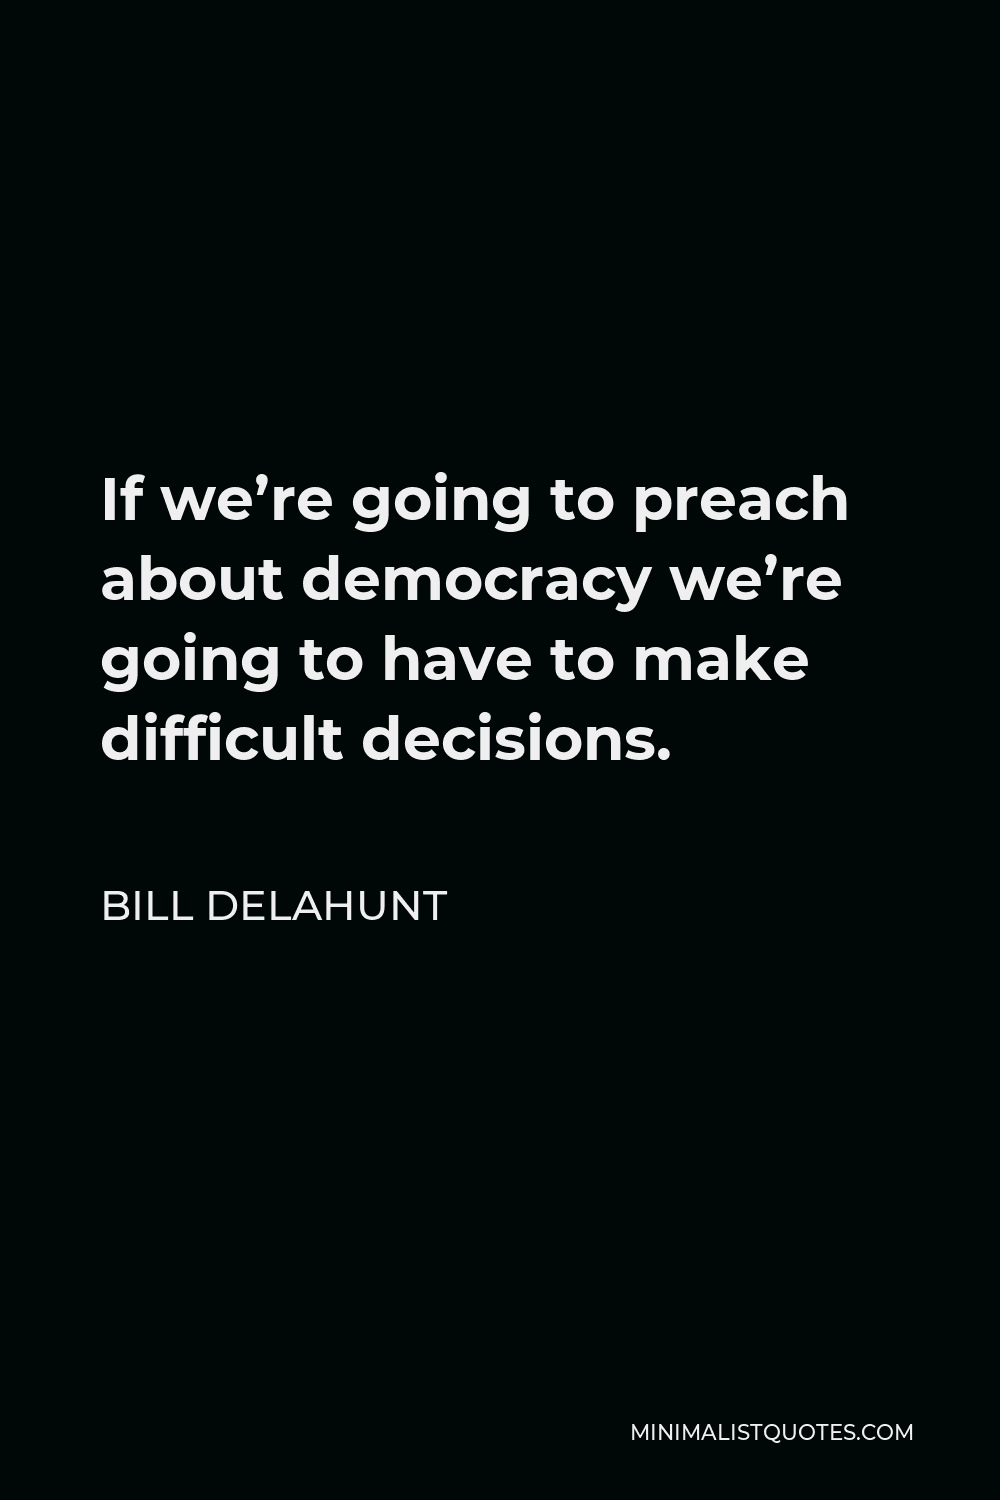 Bill Delahunt Quote - If we’re going to preach about democracy we’re going to have to make difficult decisions.